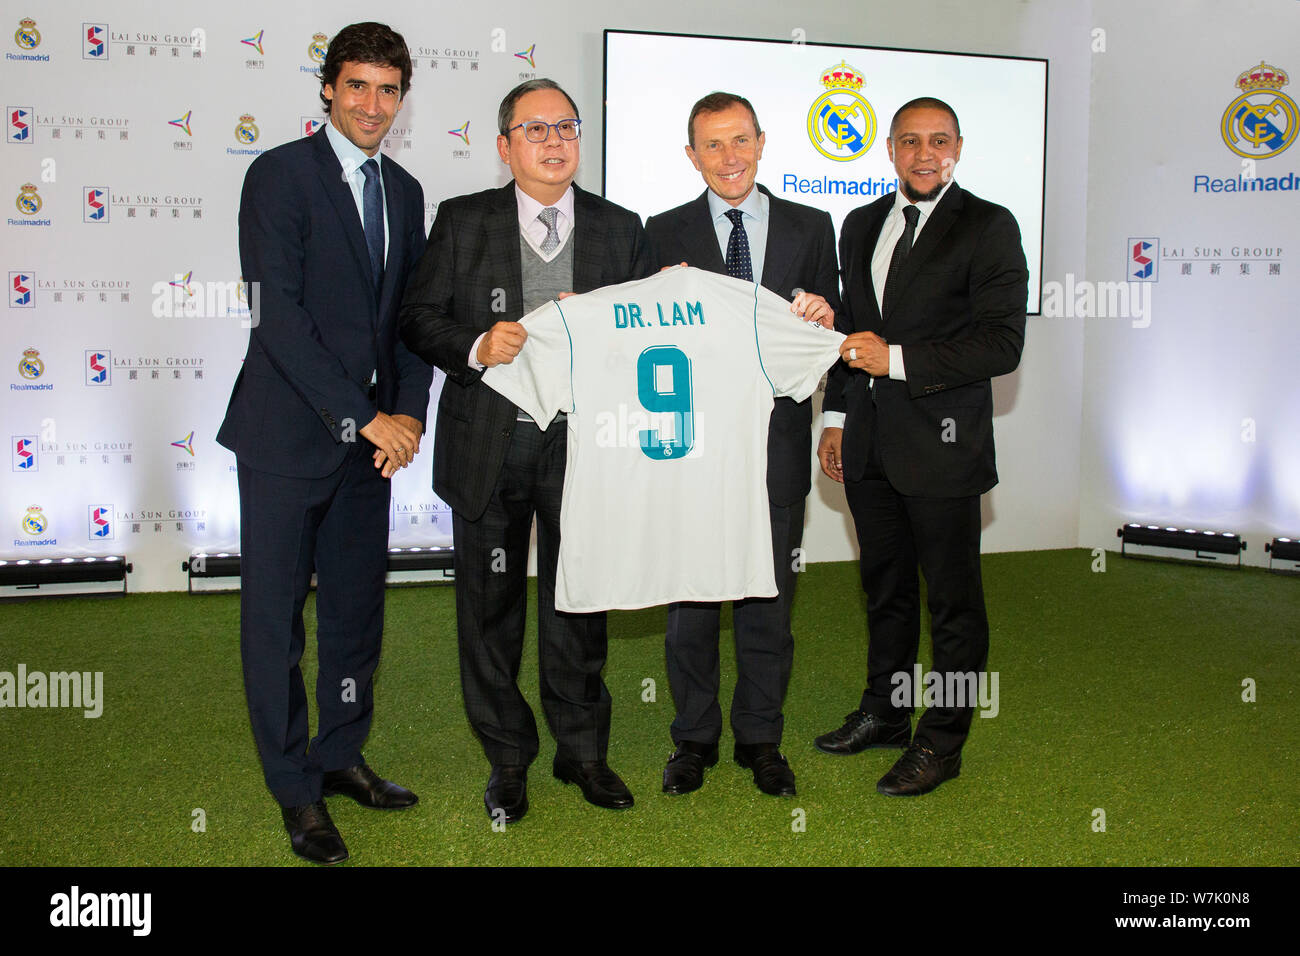 (From left) Retired Spanish football player Raul Gonzalez, Peter Lam, president of Lai Sun Group, Emilio Butragueno, director of Institutional Relatio Stock Photo